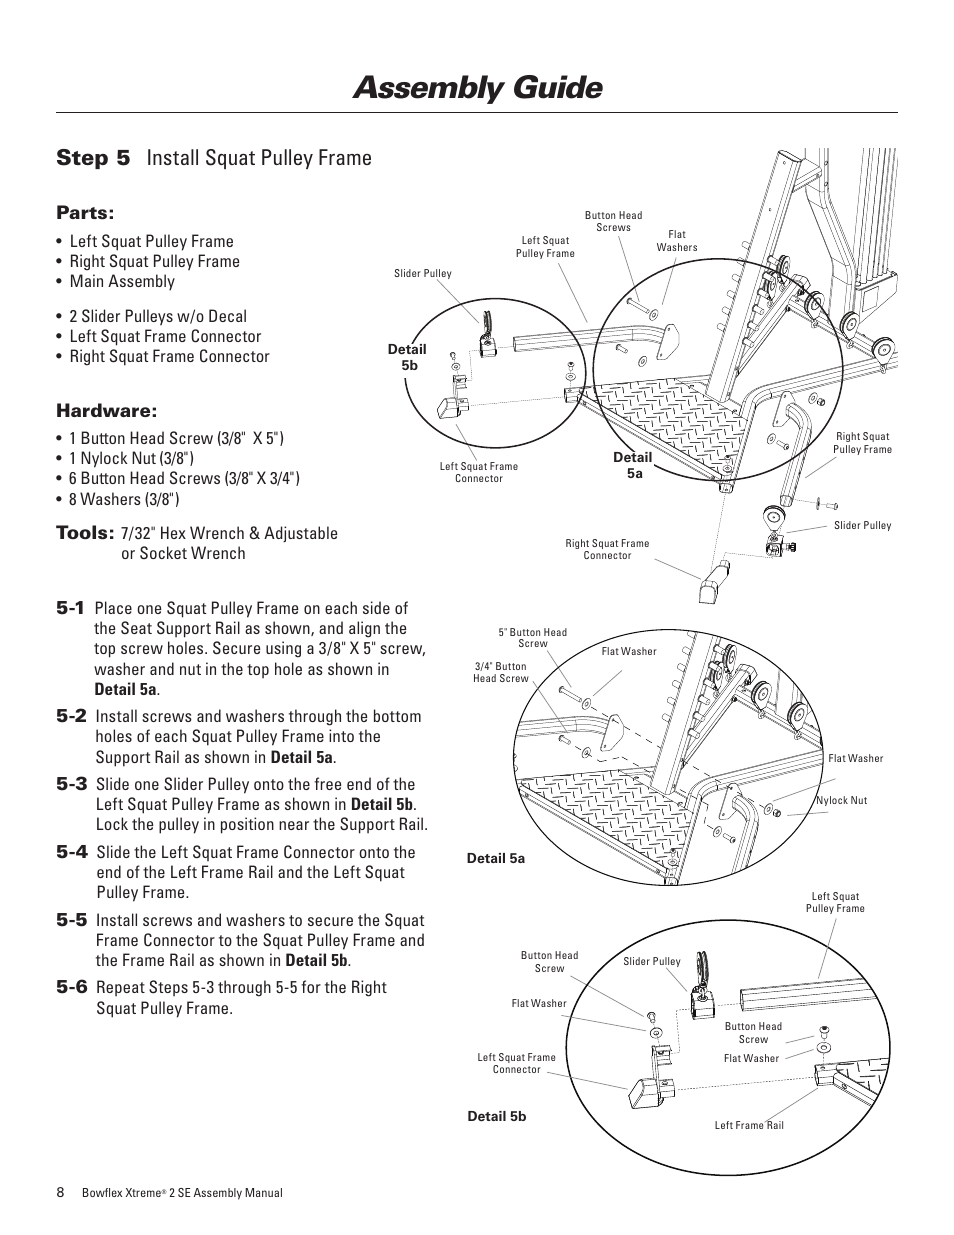 Assembly guide, Step 5 install squat pulley frame, Parts | Hardware, Tools | Bowflex Xtreme 2 SE User Manual | Page 12 / 28